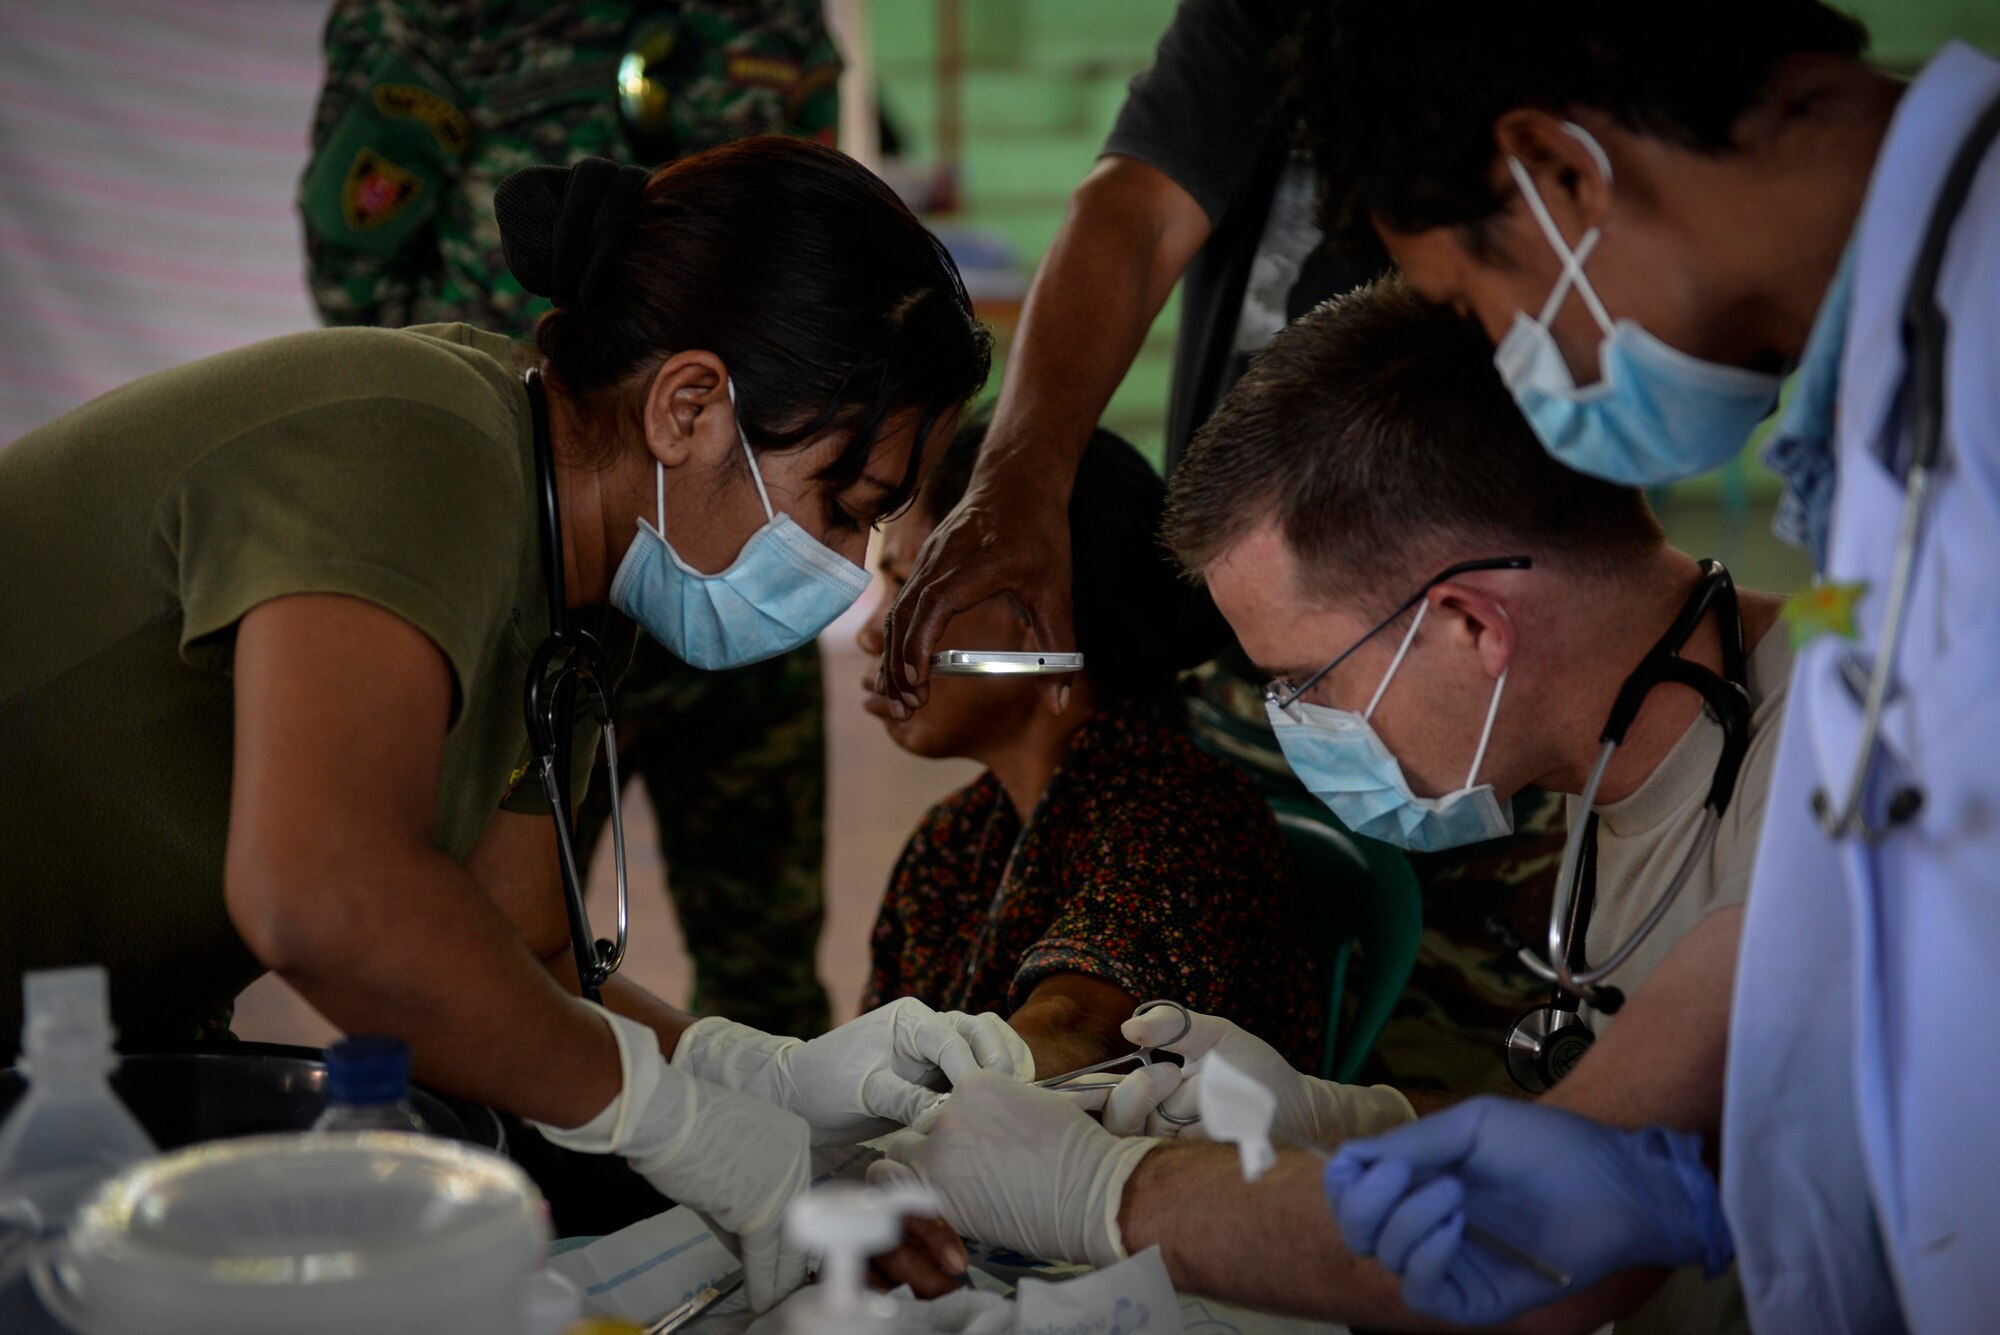 U.S. Air Force Maj. Richard Trowbridge (right), family practice physician assigned to the 374th Medical Group at Yokota Air Base, Japan, extracts a cyst from a patient's arm with Falintil-Forças de Defesa de Timor-Leste 2nd Lt. Anabela de Cruz (left), during an Operation Pacific Angel 15-2 health services outreach clinic Sept. 7, 2015, in Baucau, Timor-Leste. Pacific Angel is a multilateral humanitarian assistance civil military operation, which improves military-to-military partnerships in the Pacific while also providing medical health outreach, civic engineering projects and subject matter exchanges among partner forces. (U.S. Air Force photo by Staff Sgt. Alexander W. Riedel/Released)